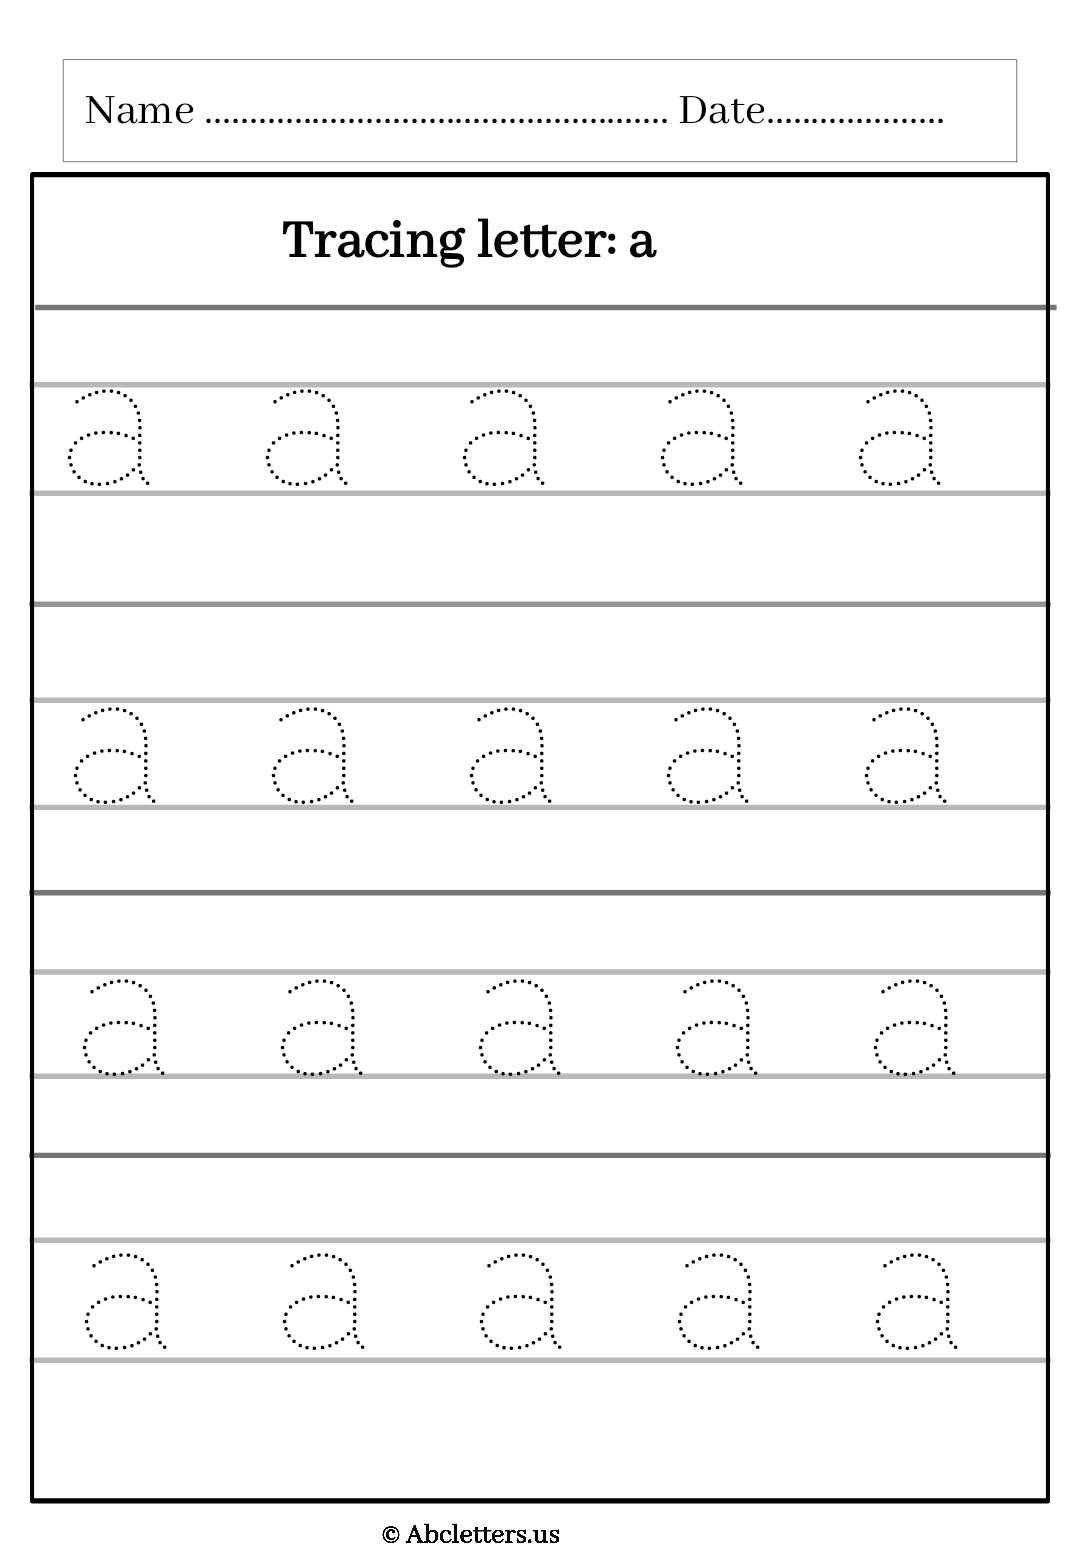 Tracing letter lowercase a with 3 line